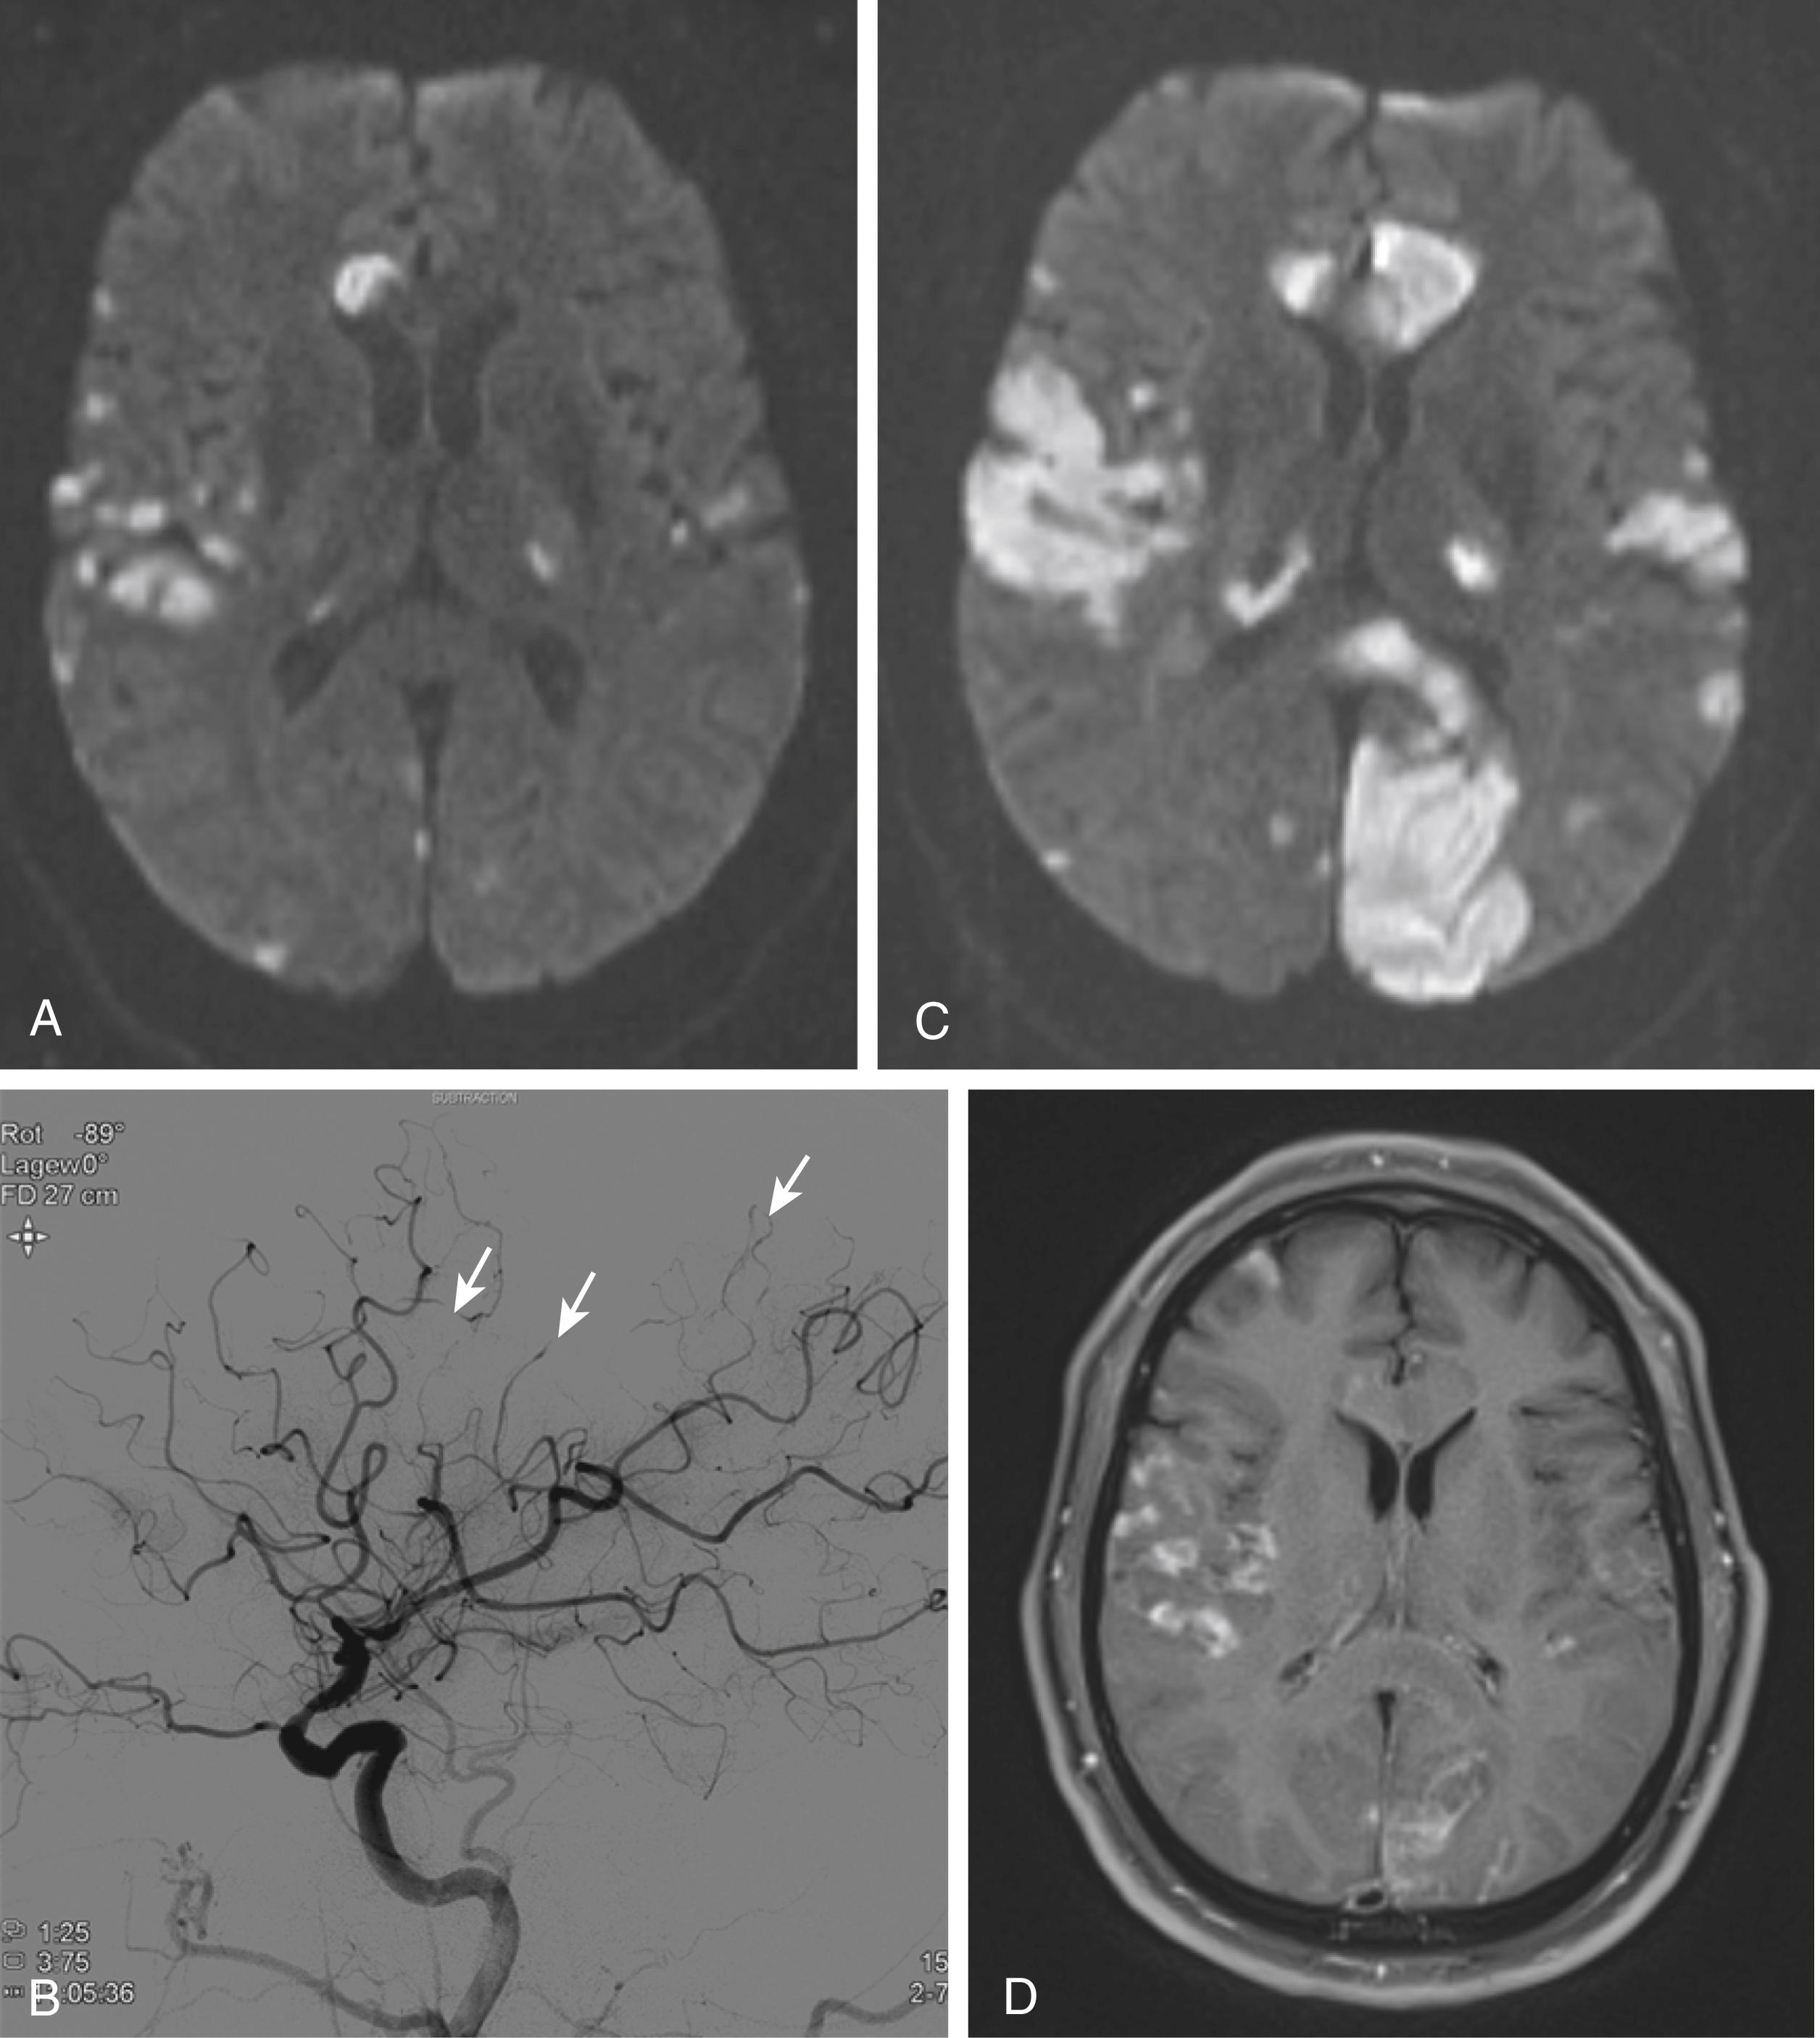 Fig. 36.2, Primary angiitis of the central nervous system. A 61-year-old man with a long history of smoking presented with a right partial third nerve palsy, dysarthria, and left central facial paresis. His relatives described 2 months of memory impairment and apraxia. Diffusion-weighted magnetic resonance imaging (MRI; A) showed multiple infarcts in bilateral cerebral hemispheres, and in both anterior and posterior circulations, including superficial and deep (right head of caudate) structures. Digital subtraction cerebral angiography (B) showed multiple areas of focal stenosis in the distal cerebral vessels (arrows) . Biopsy of the right temporal cortex and leptomeninges showed lymphocytic vasculitis with polynuclear giant cells and transmural inflammation and necrosis of the vessel wall consistent with primary angiitis of the central nervous system. Follow-up MRI 8 days later, after treatment with steroids and cyclophosphamide, showed new infarcts by diffusion-weighted imaging (C) and enhancement on T1 weighted-images (D). The patient was discharged to a rehabilitation center with cortical blindness, global aphasia, and left side hemiplegia; he died 10 months later despite therapy.